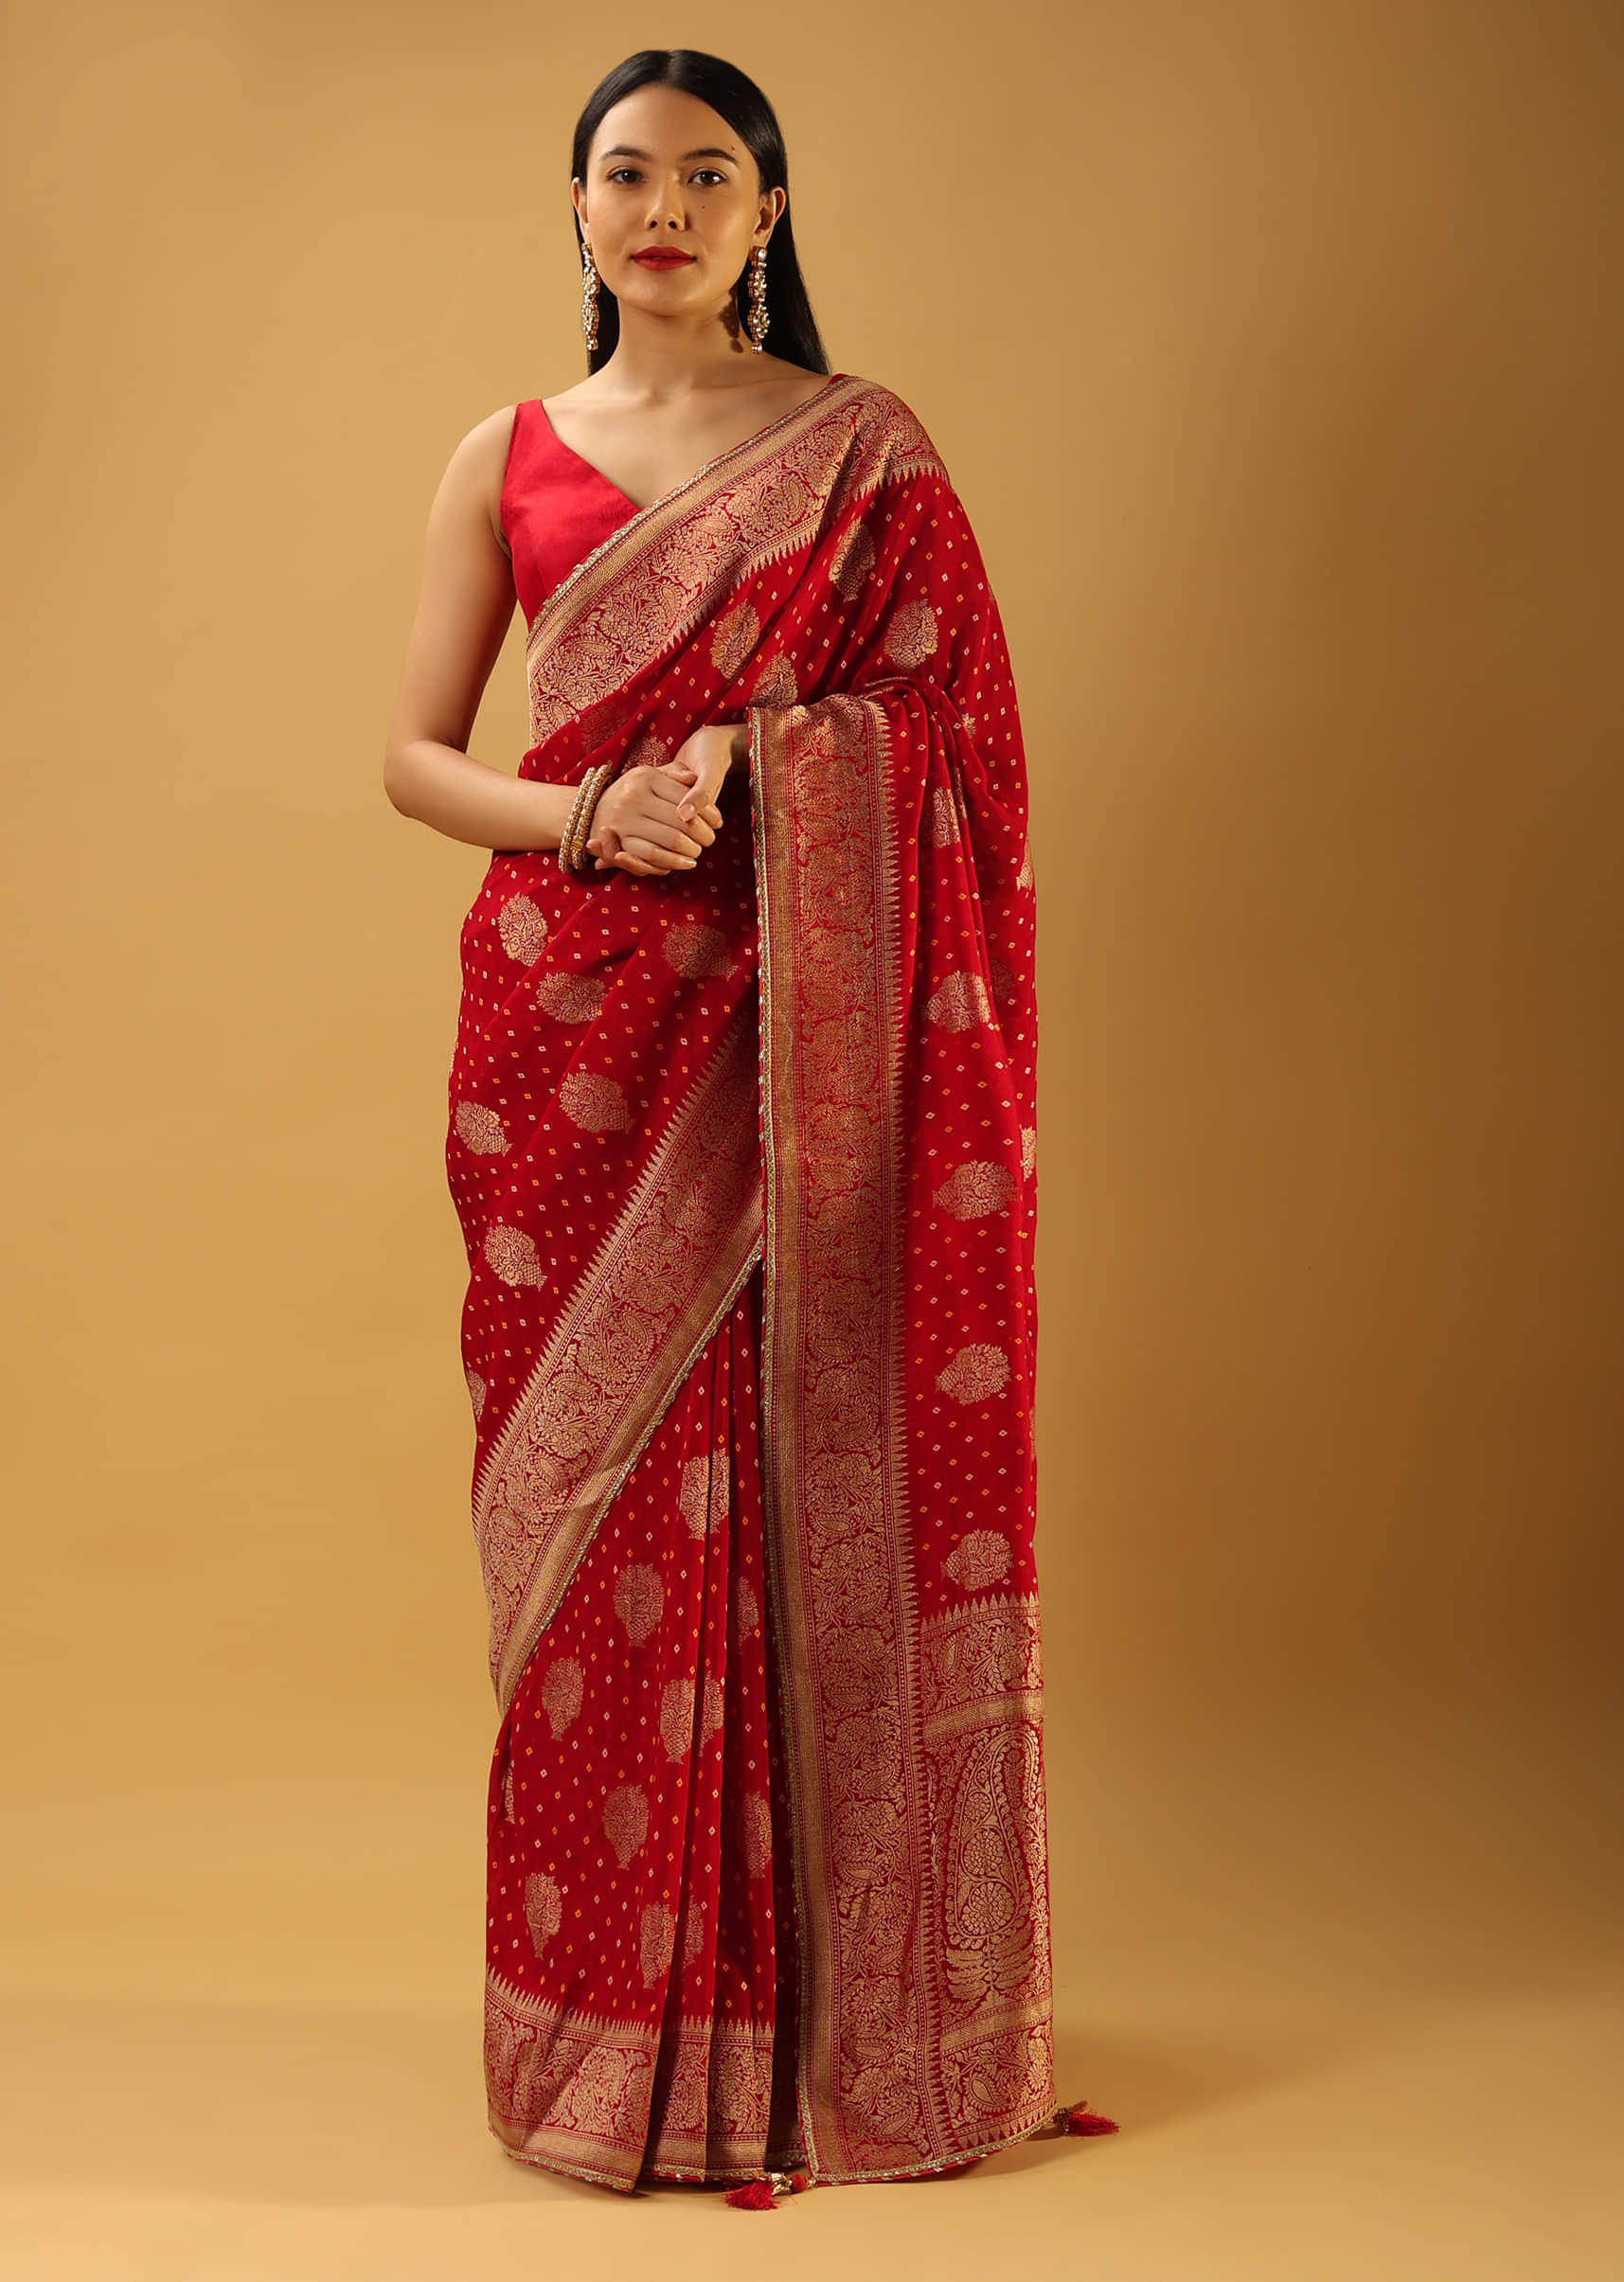 Scarlet Red Saree In Organza With Woven Buttis And Bandhani Design 